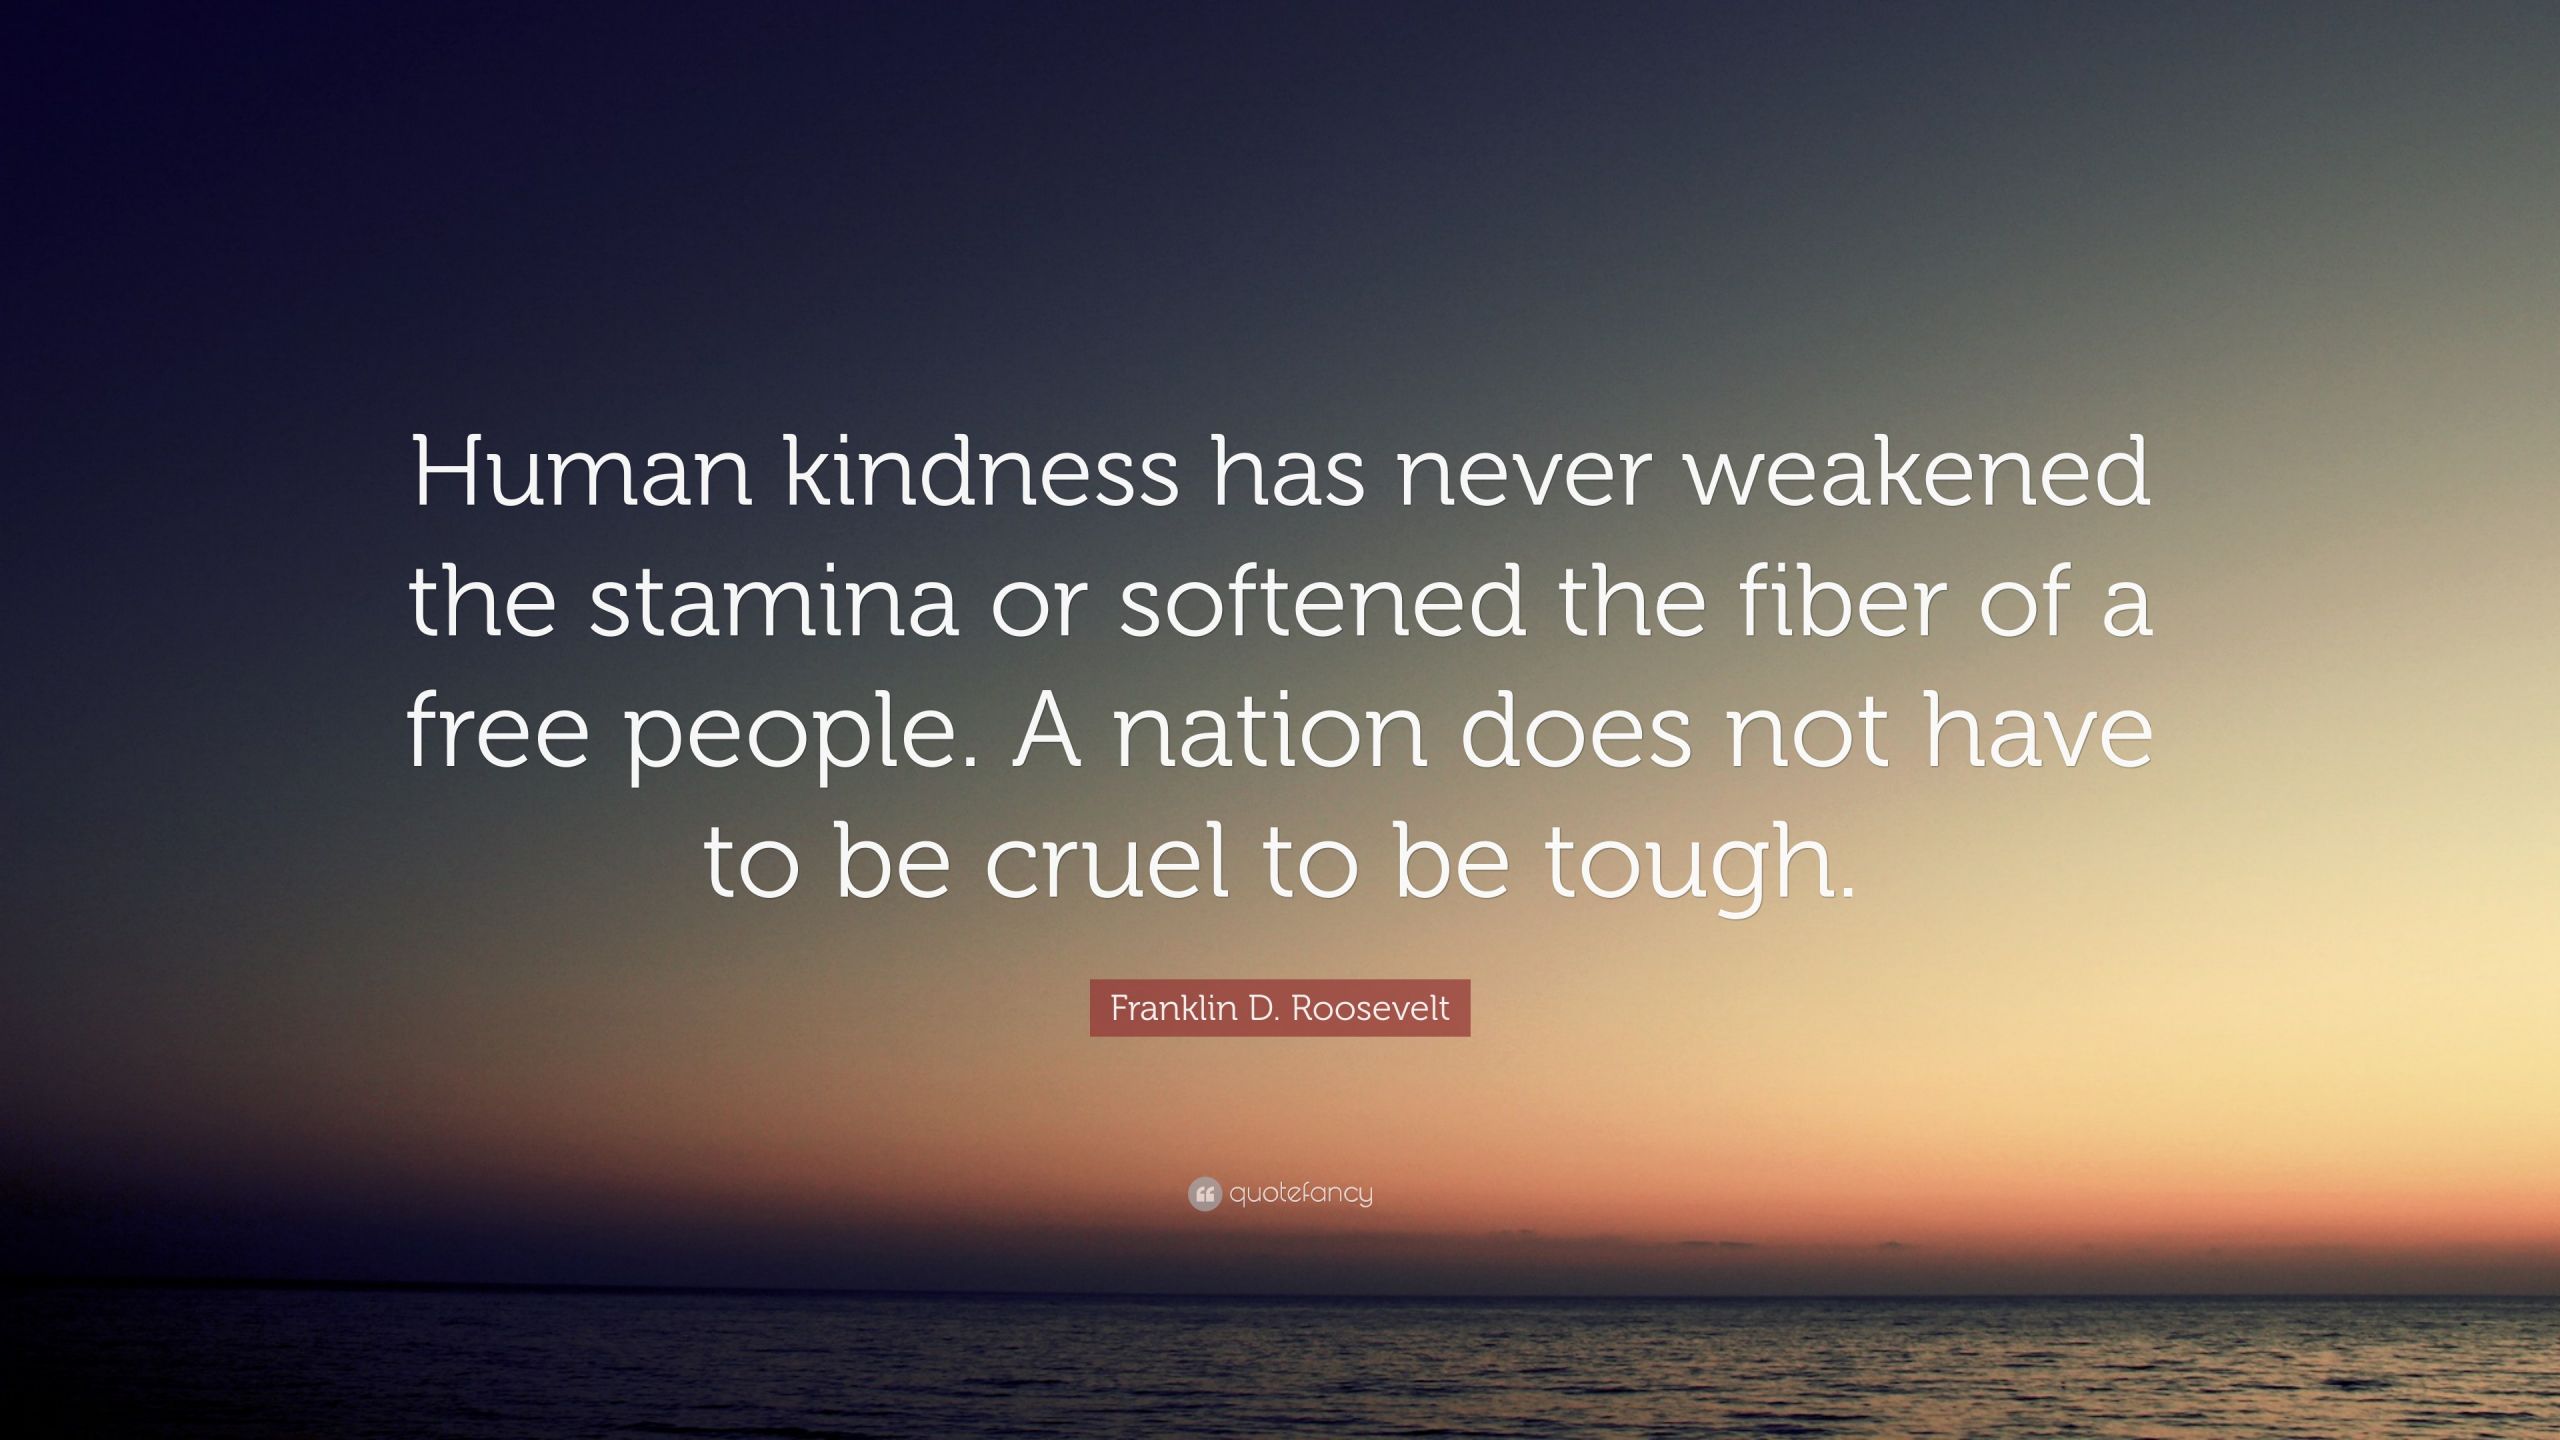 Human Kindness Quotes
 Franklin D Roosevelt Quote “Human kindness has never